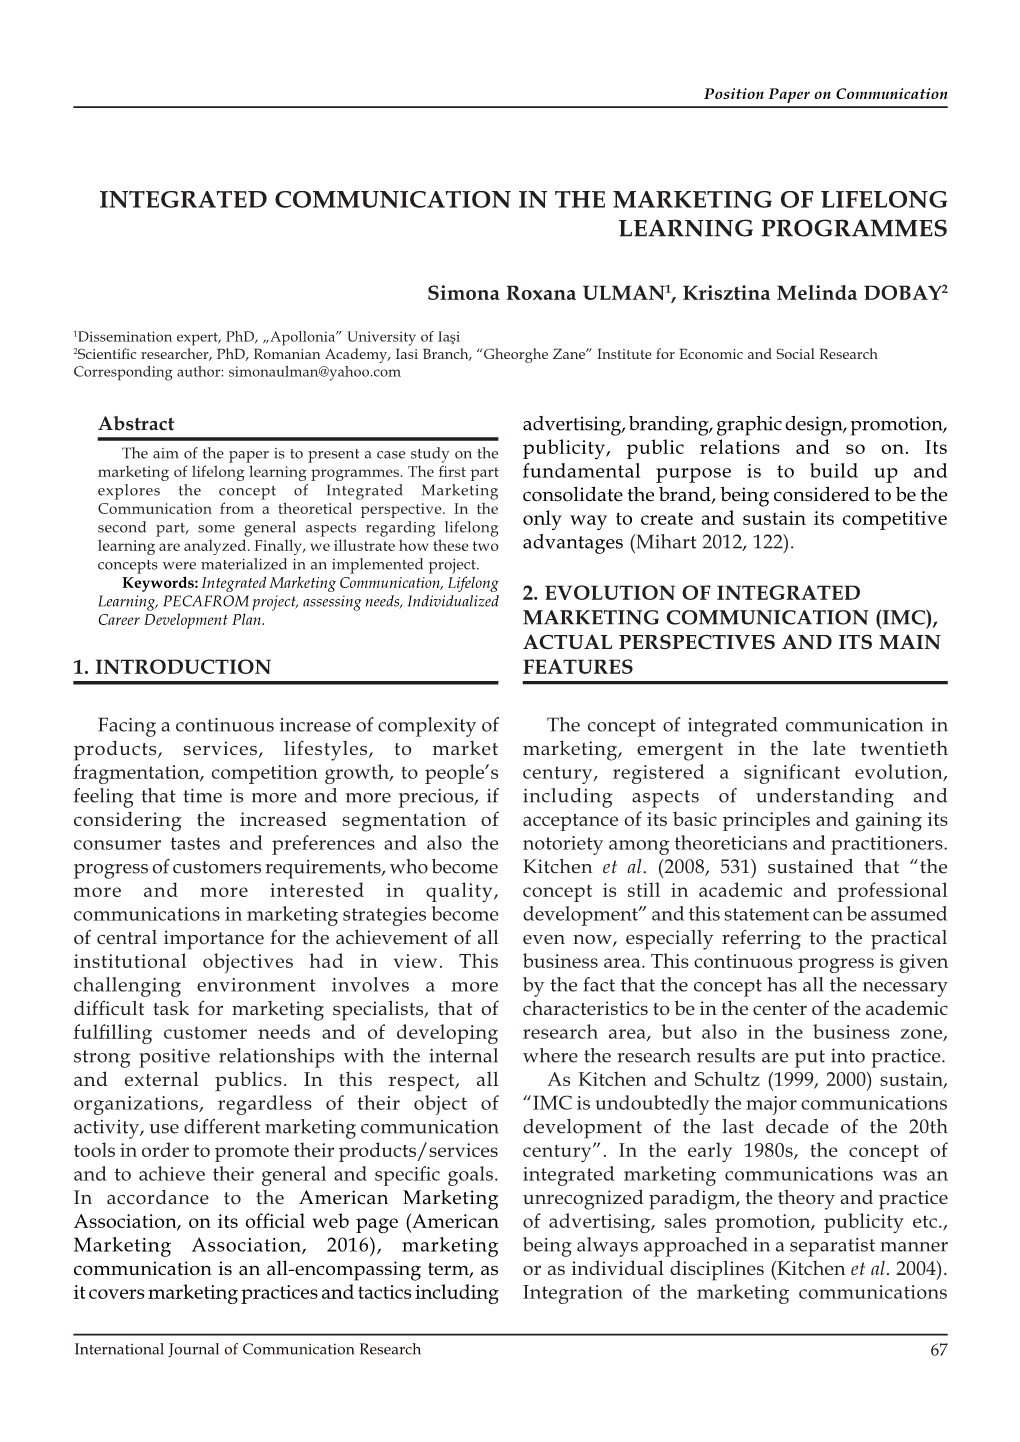 Integrated Communication in the Marketing of Lifelong Learning Programmes